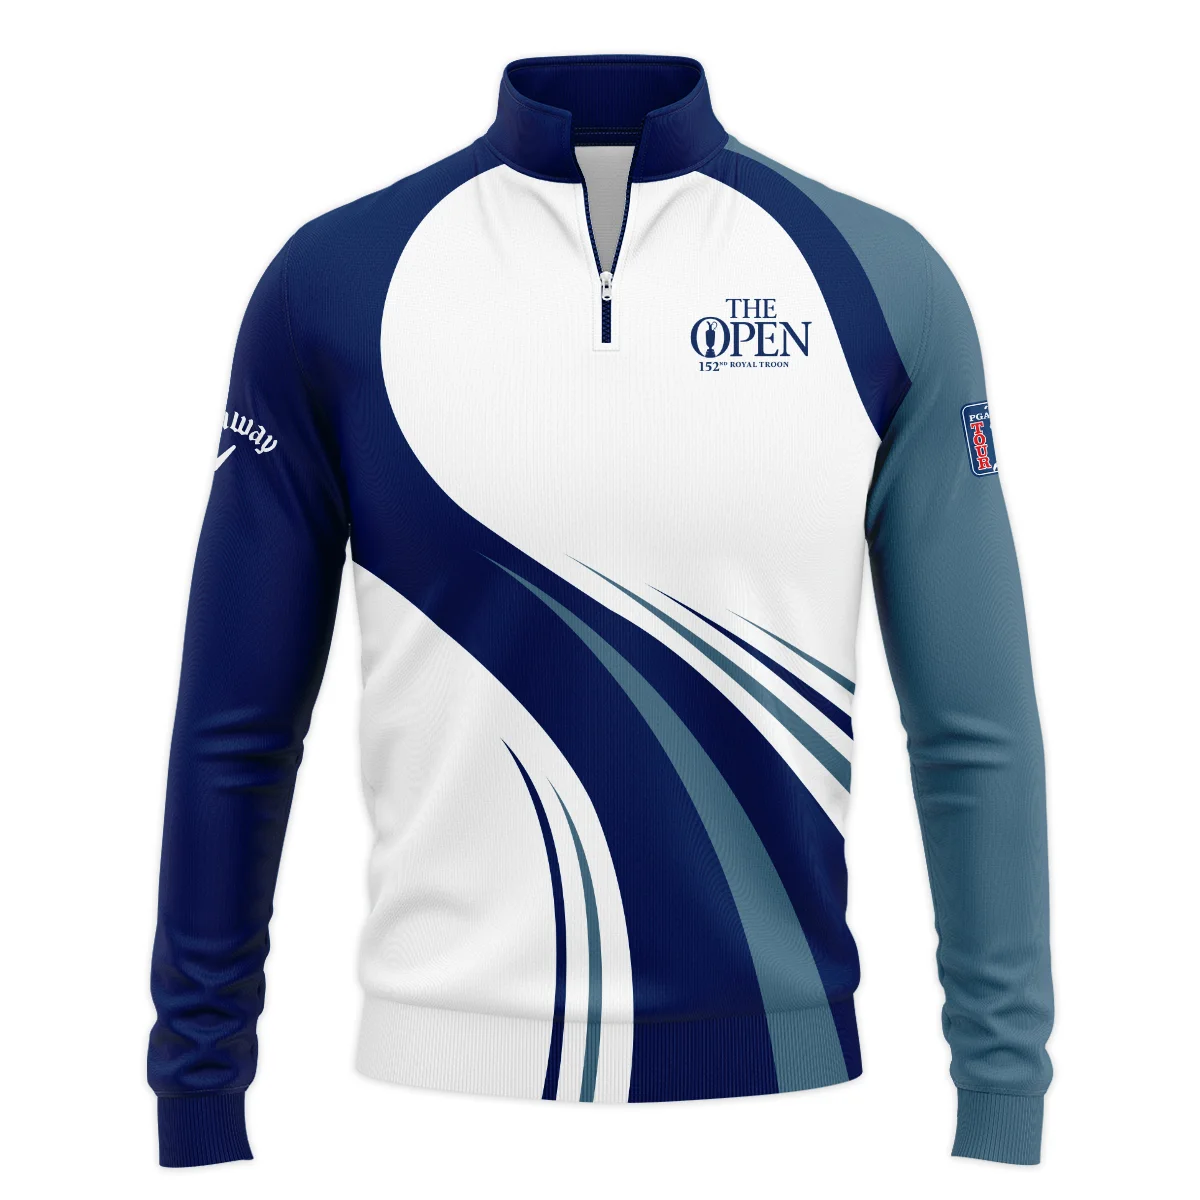 152nd Open Championship Callaway White Mostly Desaturated Dark Blue Performance Quarter Zip Sweatshirt With Pockets All Over Prints HOTOP270624A02CLWTS